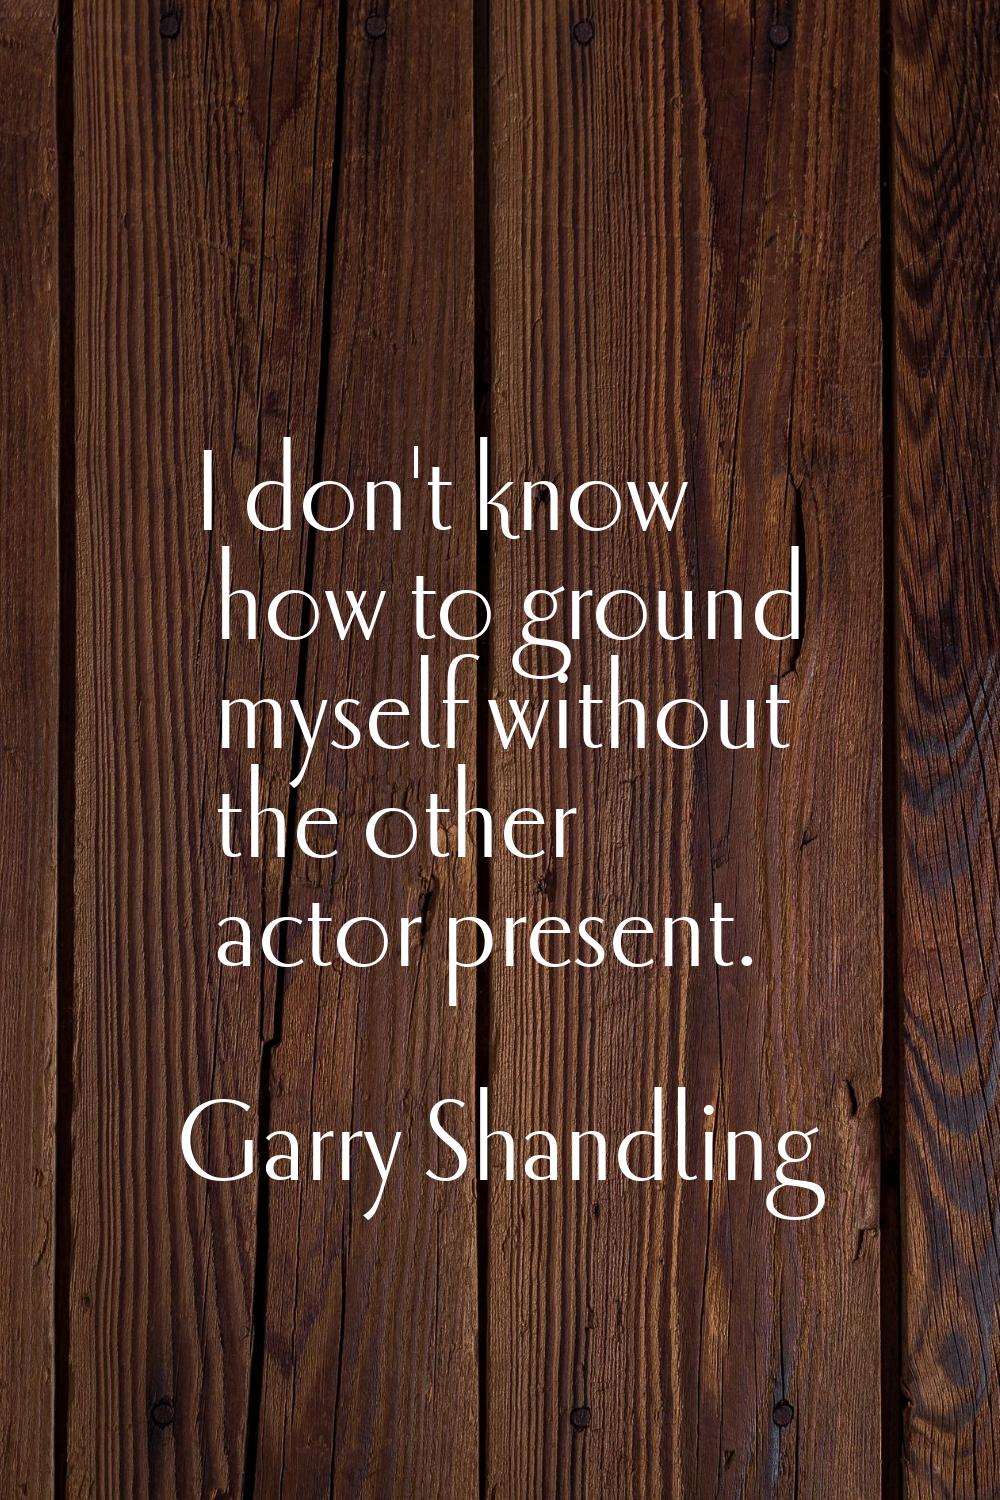 I don't know how to ground myself without the other actor present.